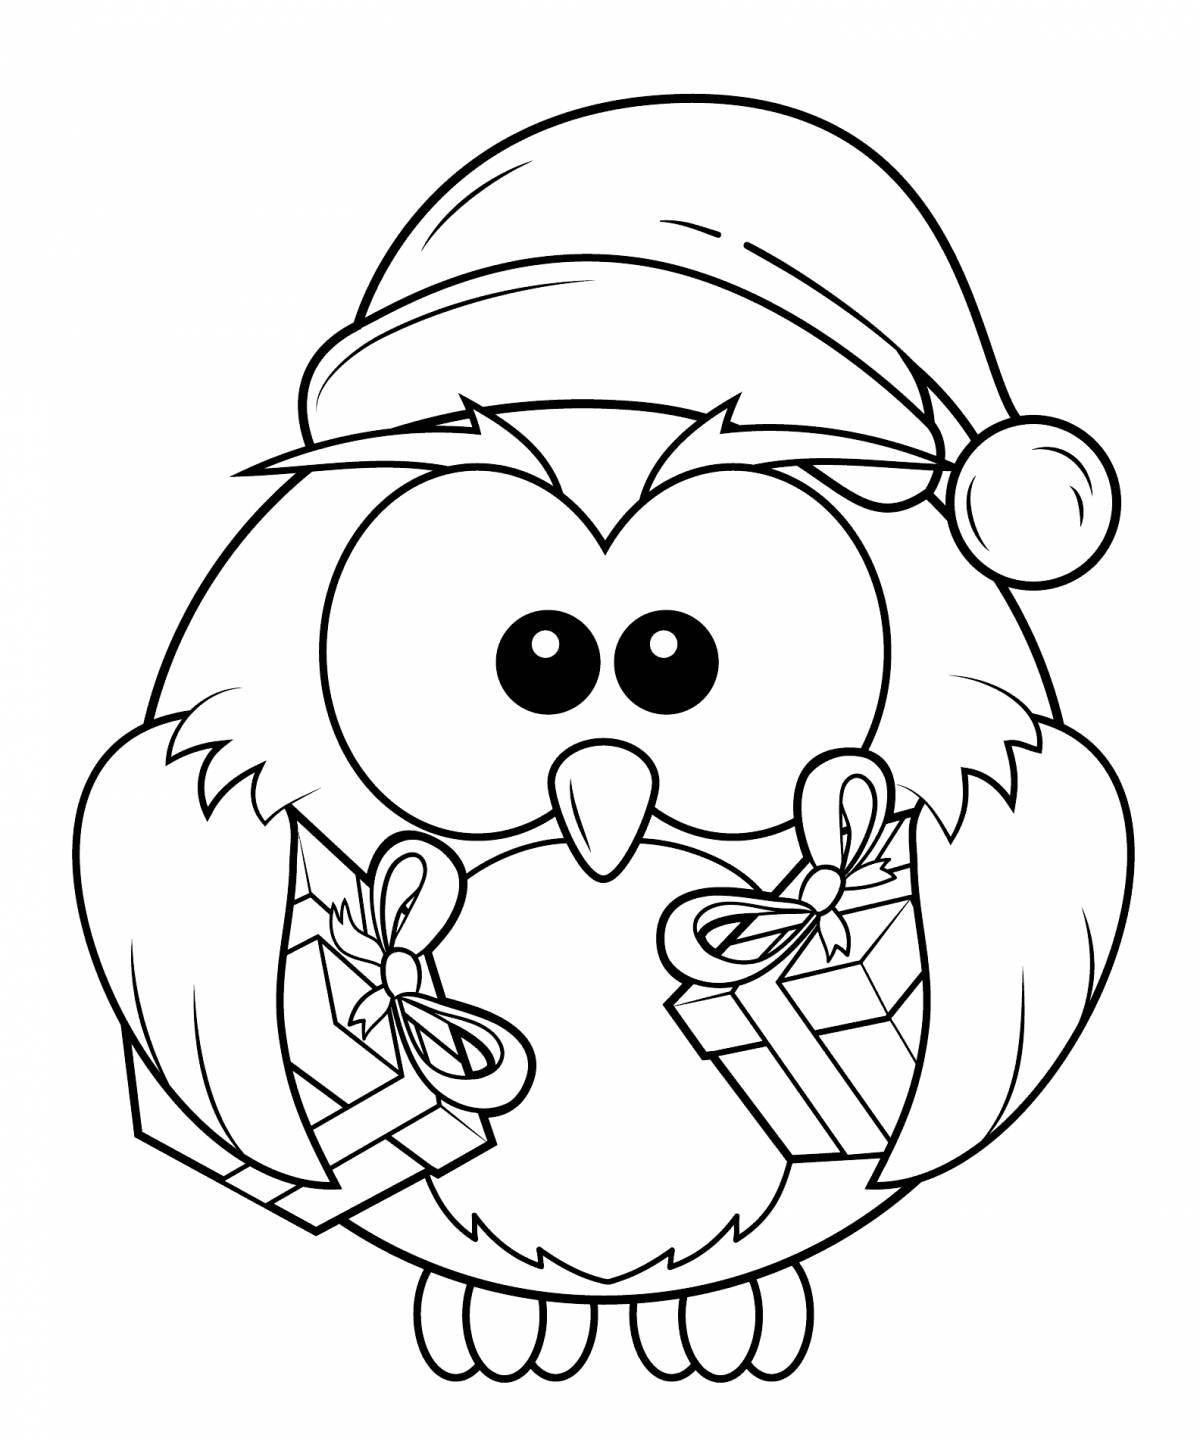 Glowing christmas owl coloring page